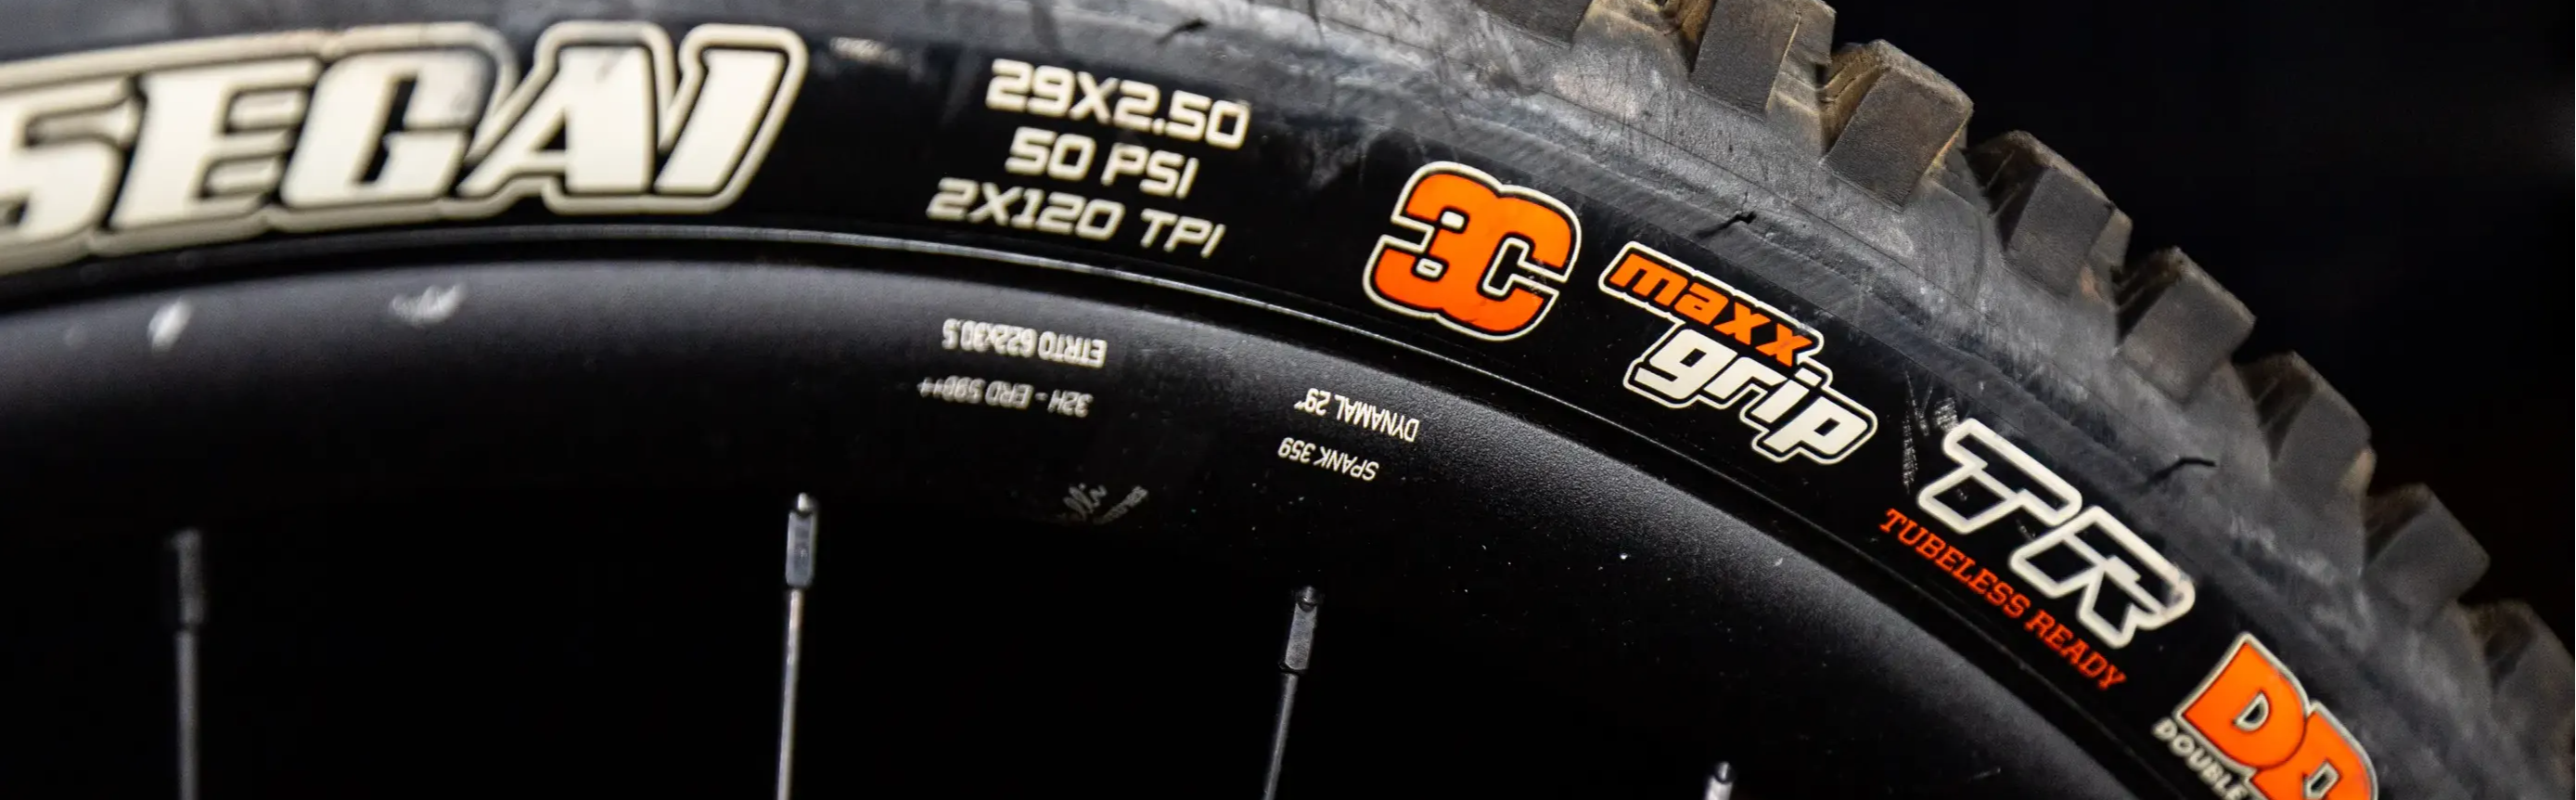 Detail of Maxxis Assegai Mountain Bike Tire with 3C Maxx Grip rubber compound on a black background